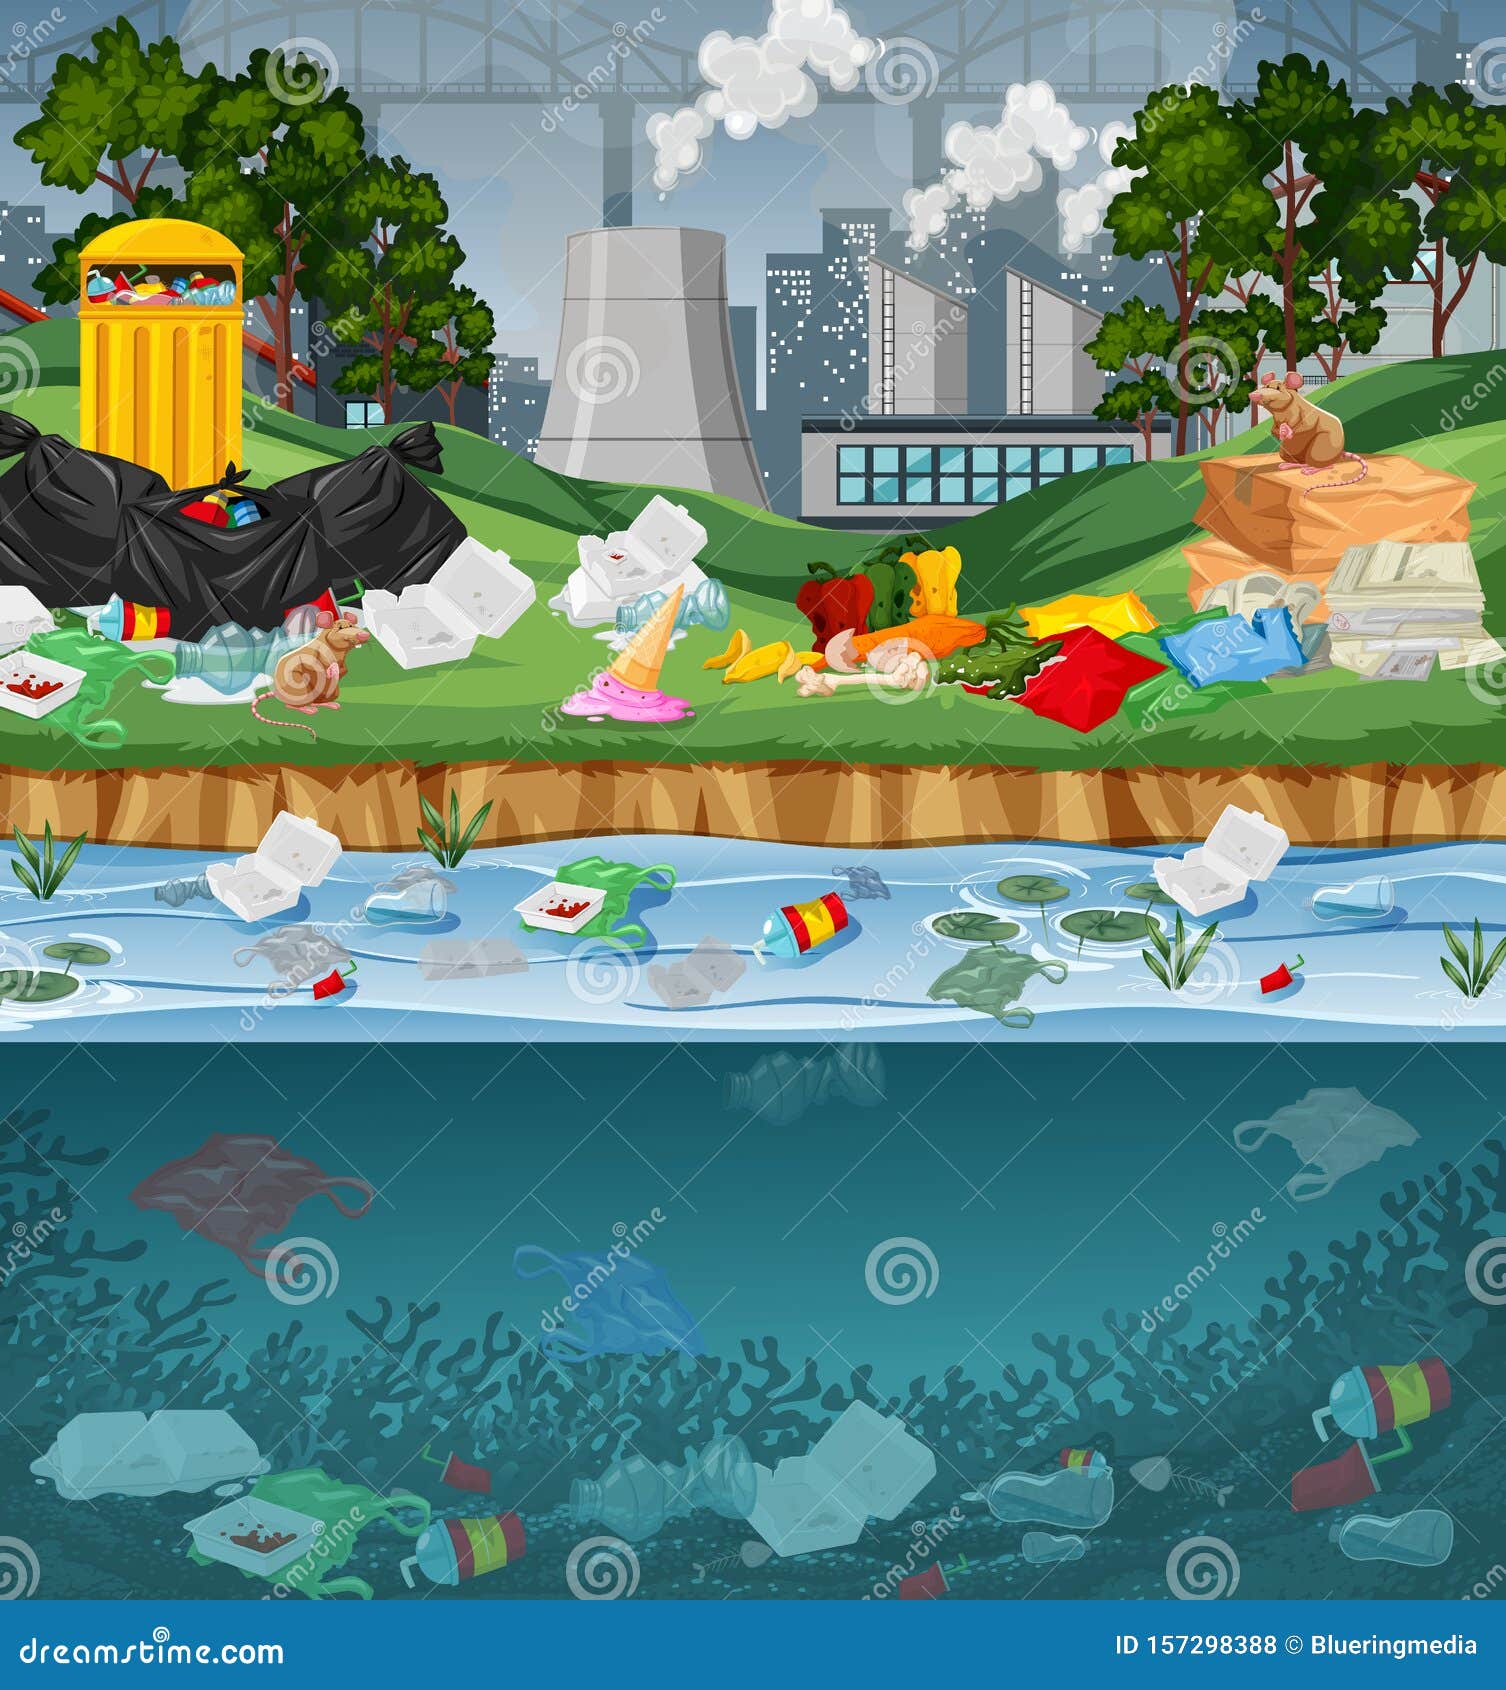 Water Pollution with Plastic Bags in Park Stock Vector - Illustration ...